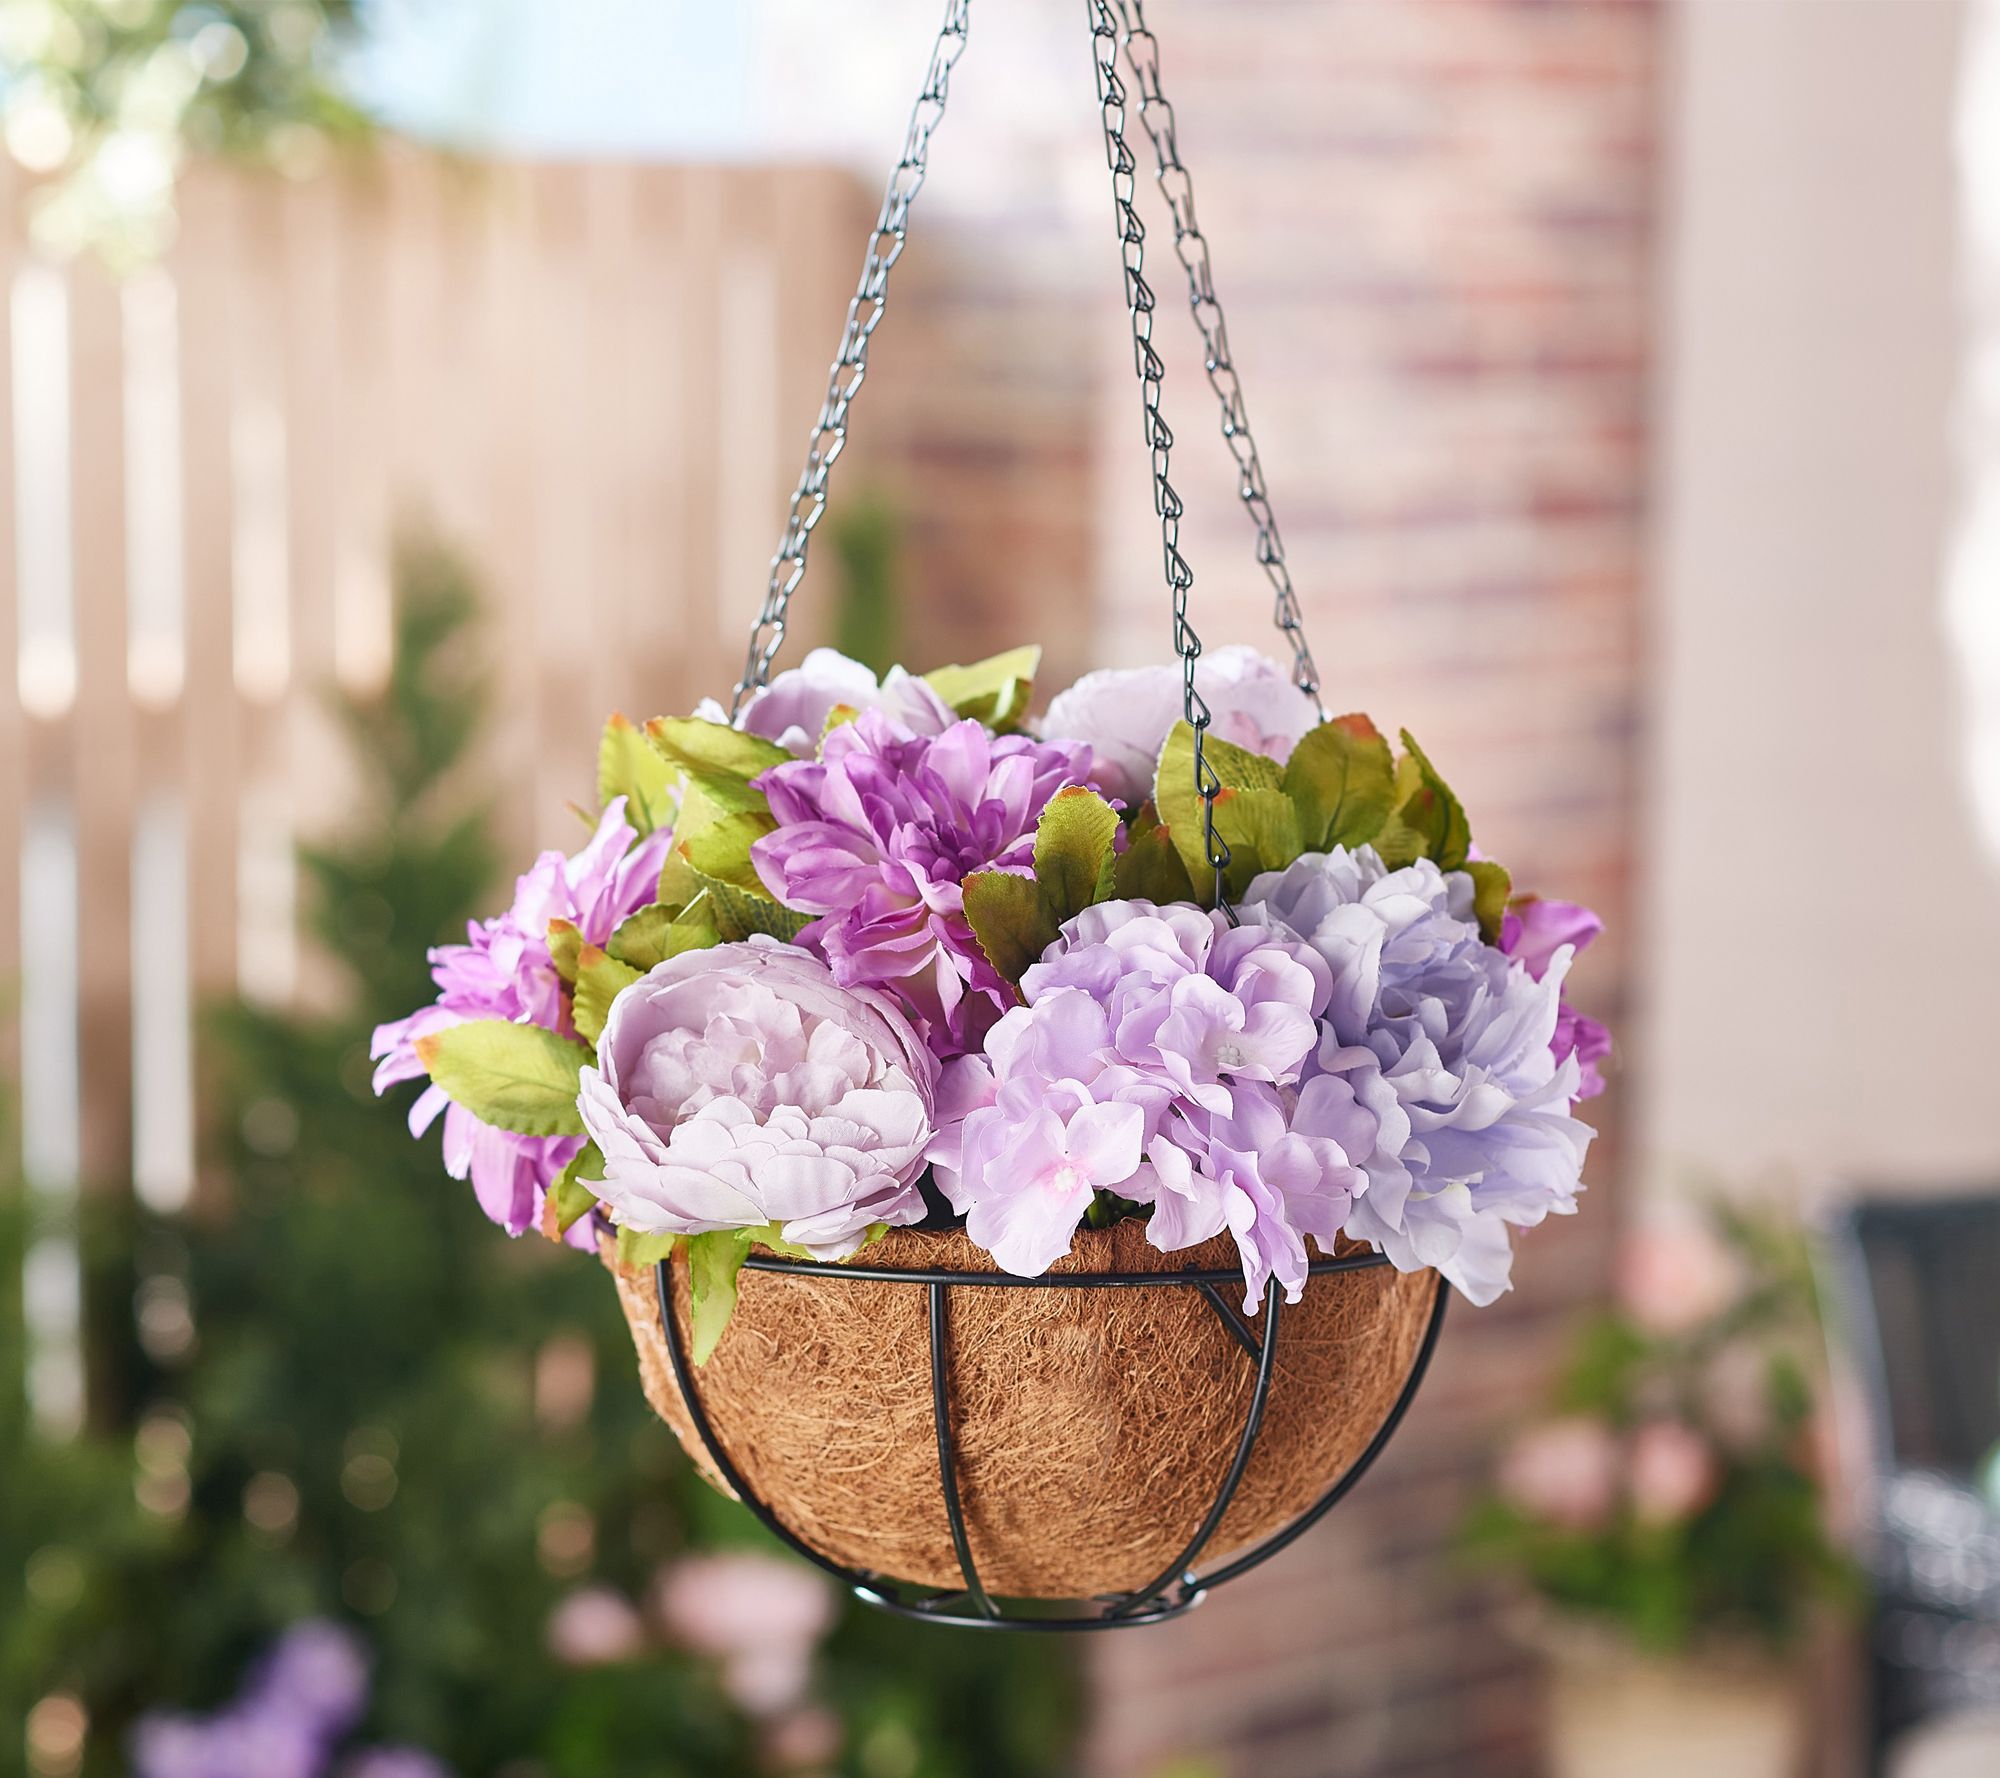 Image of Hanging basket of hydrangeas with white, pink, and blue flowers